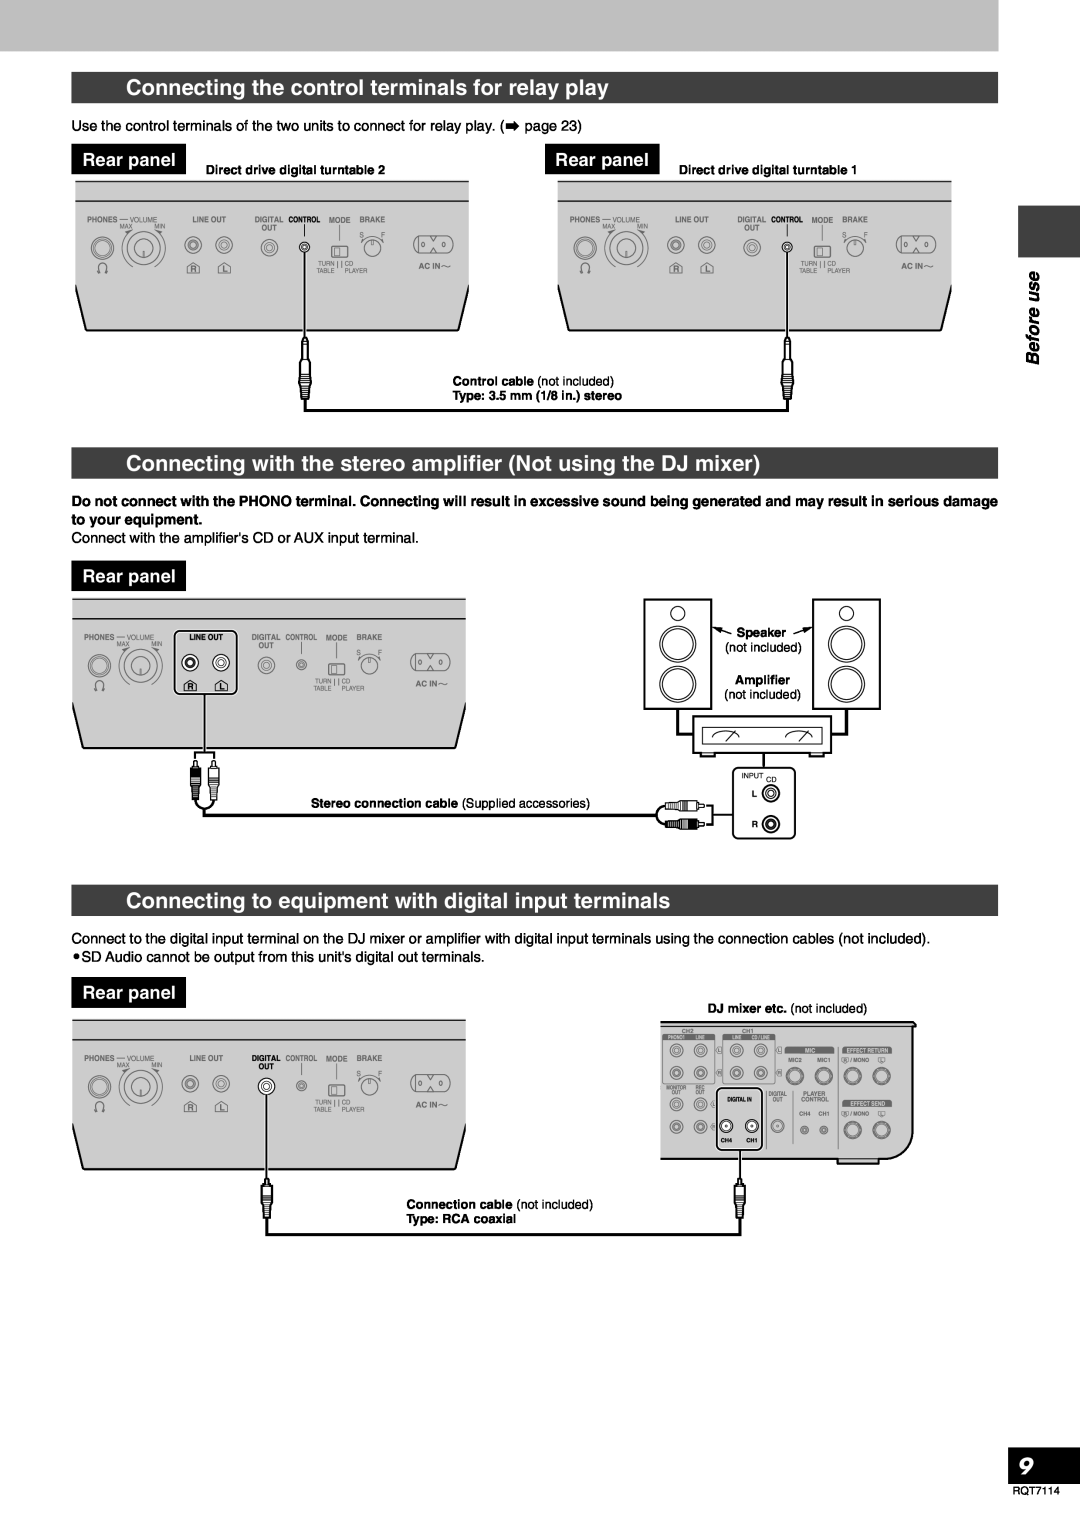 Panasonic SLDZ1200, RQT7114-2Y manual Connecting the control terminals for relay play 